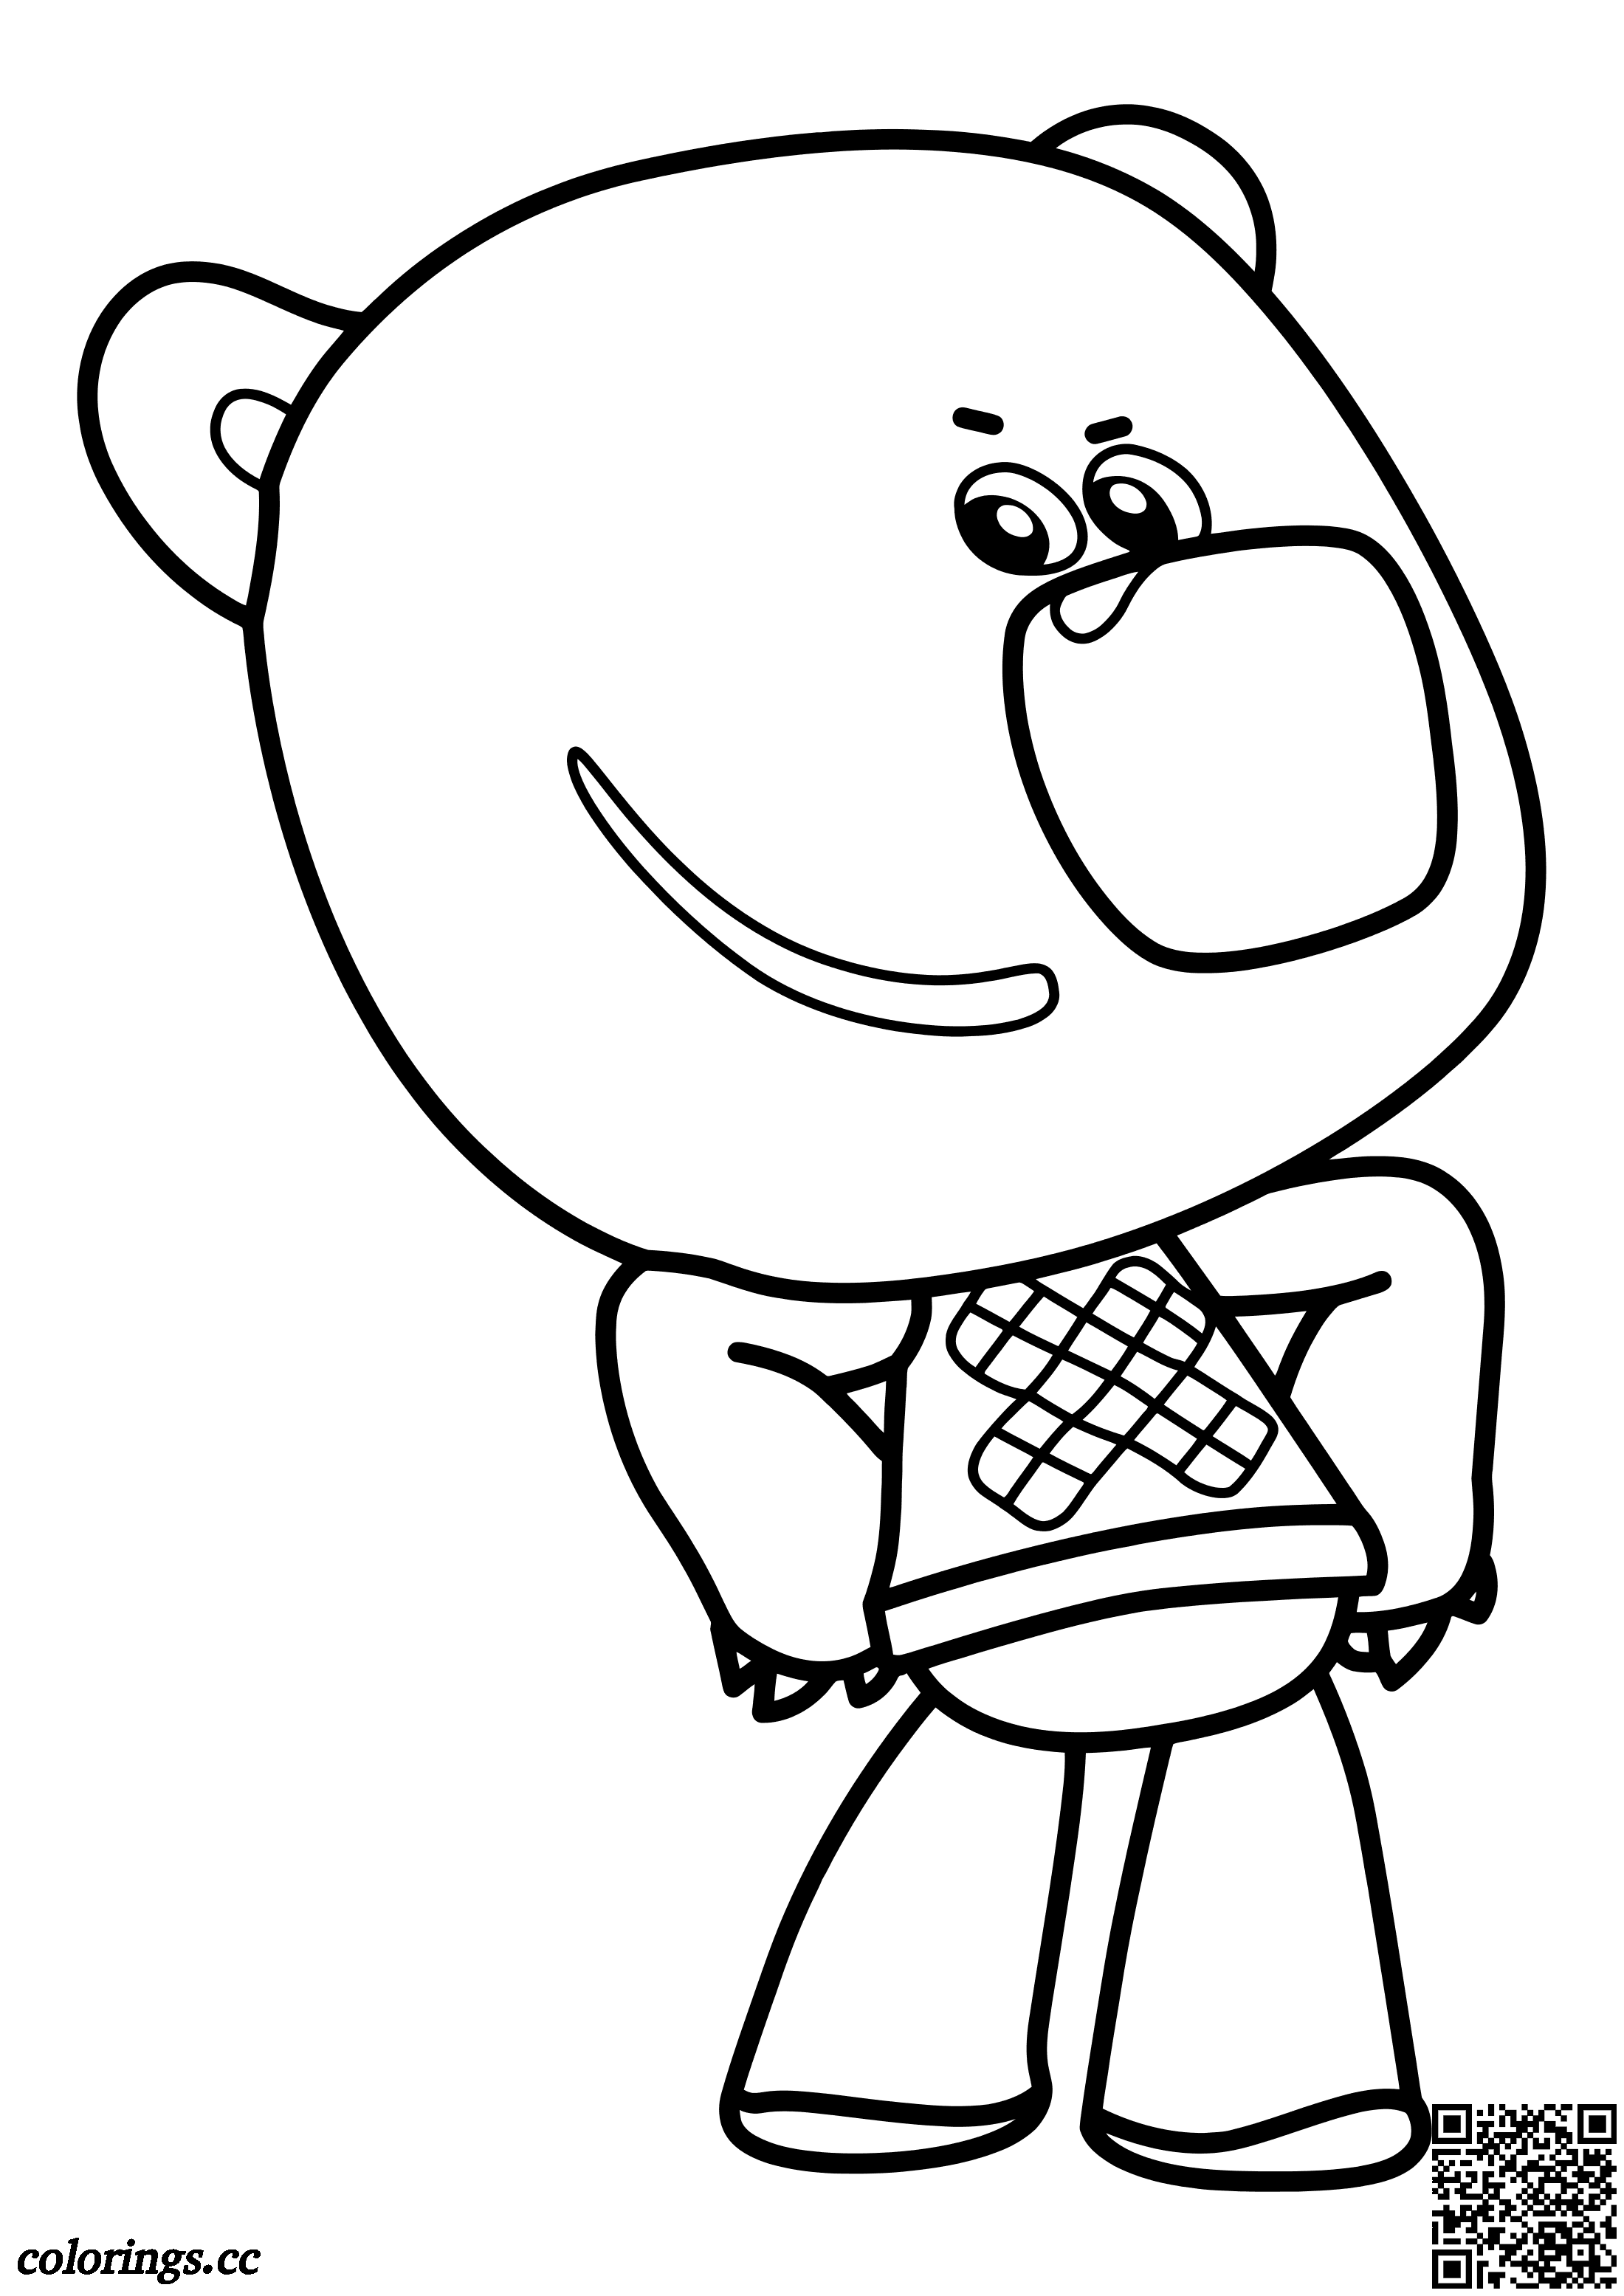 Innocent coloring pages, Be-be-bears coloring pages - Colorings.cc